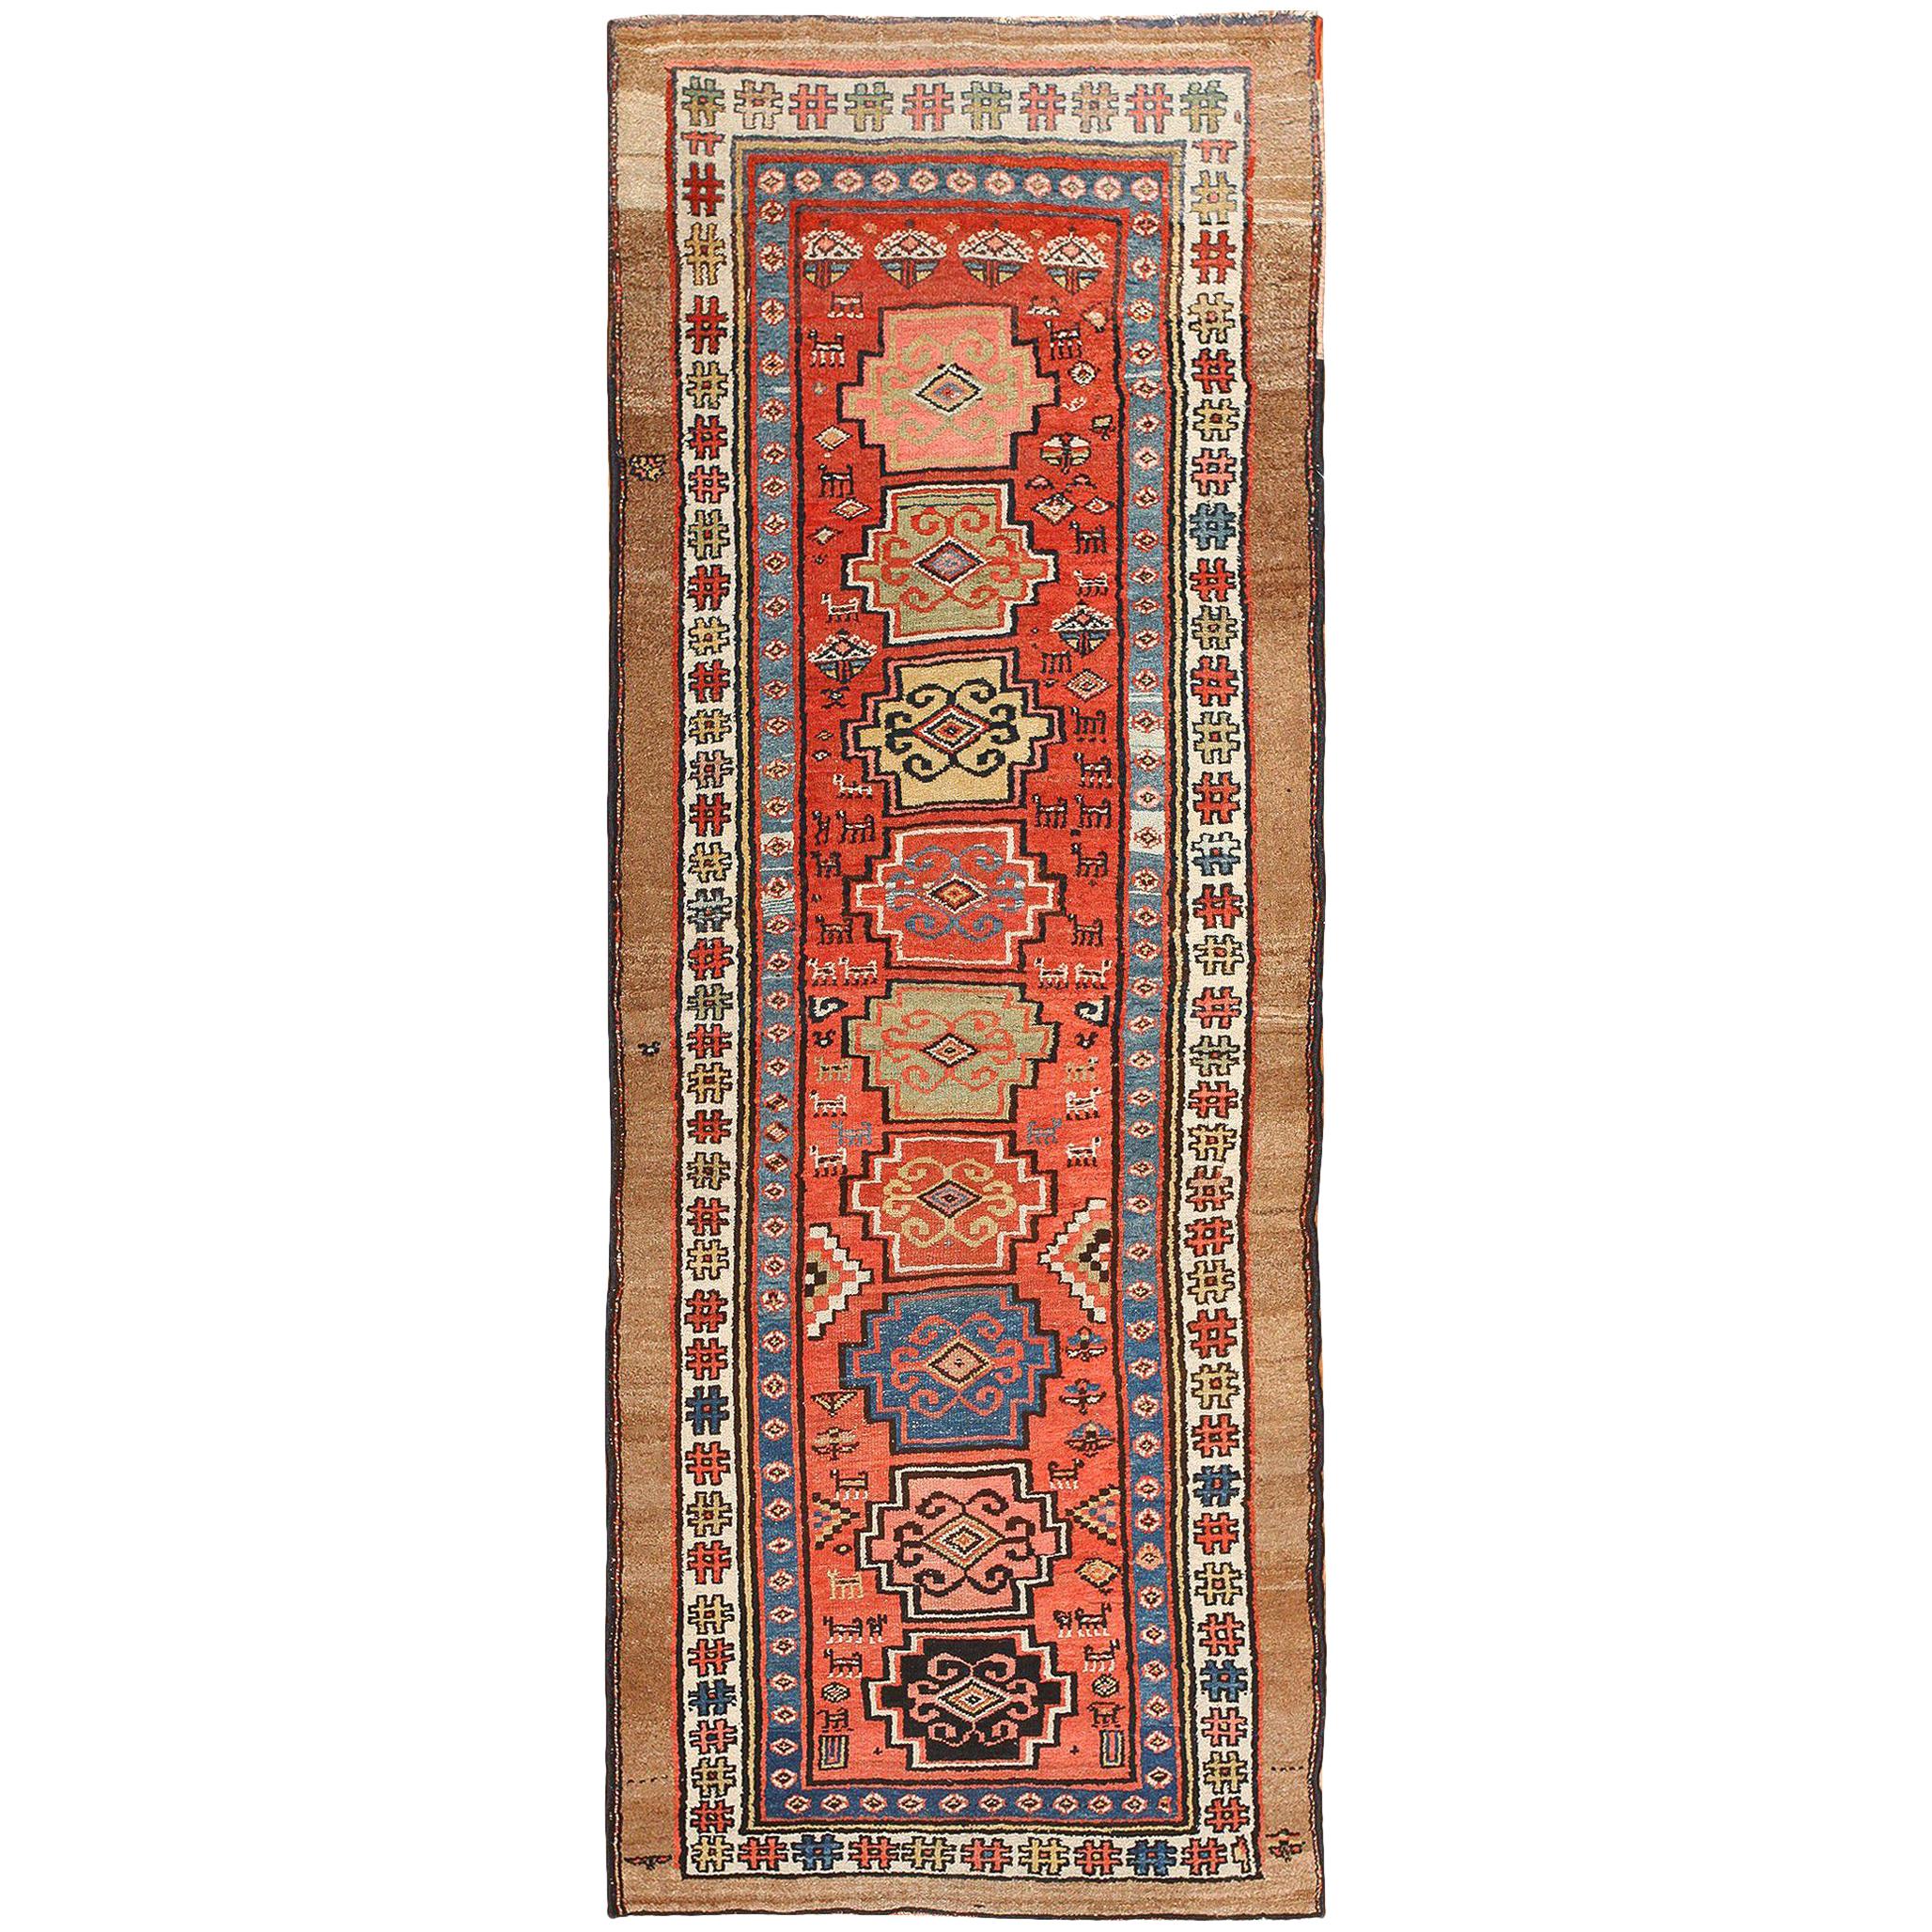 Antique Persian Northwest Rug. Size: 3 ft 6 in x 8 ft 4 in (1.07 m x 2.54 m)